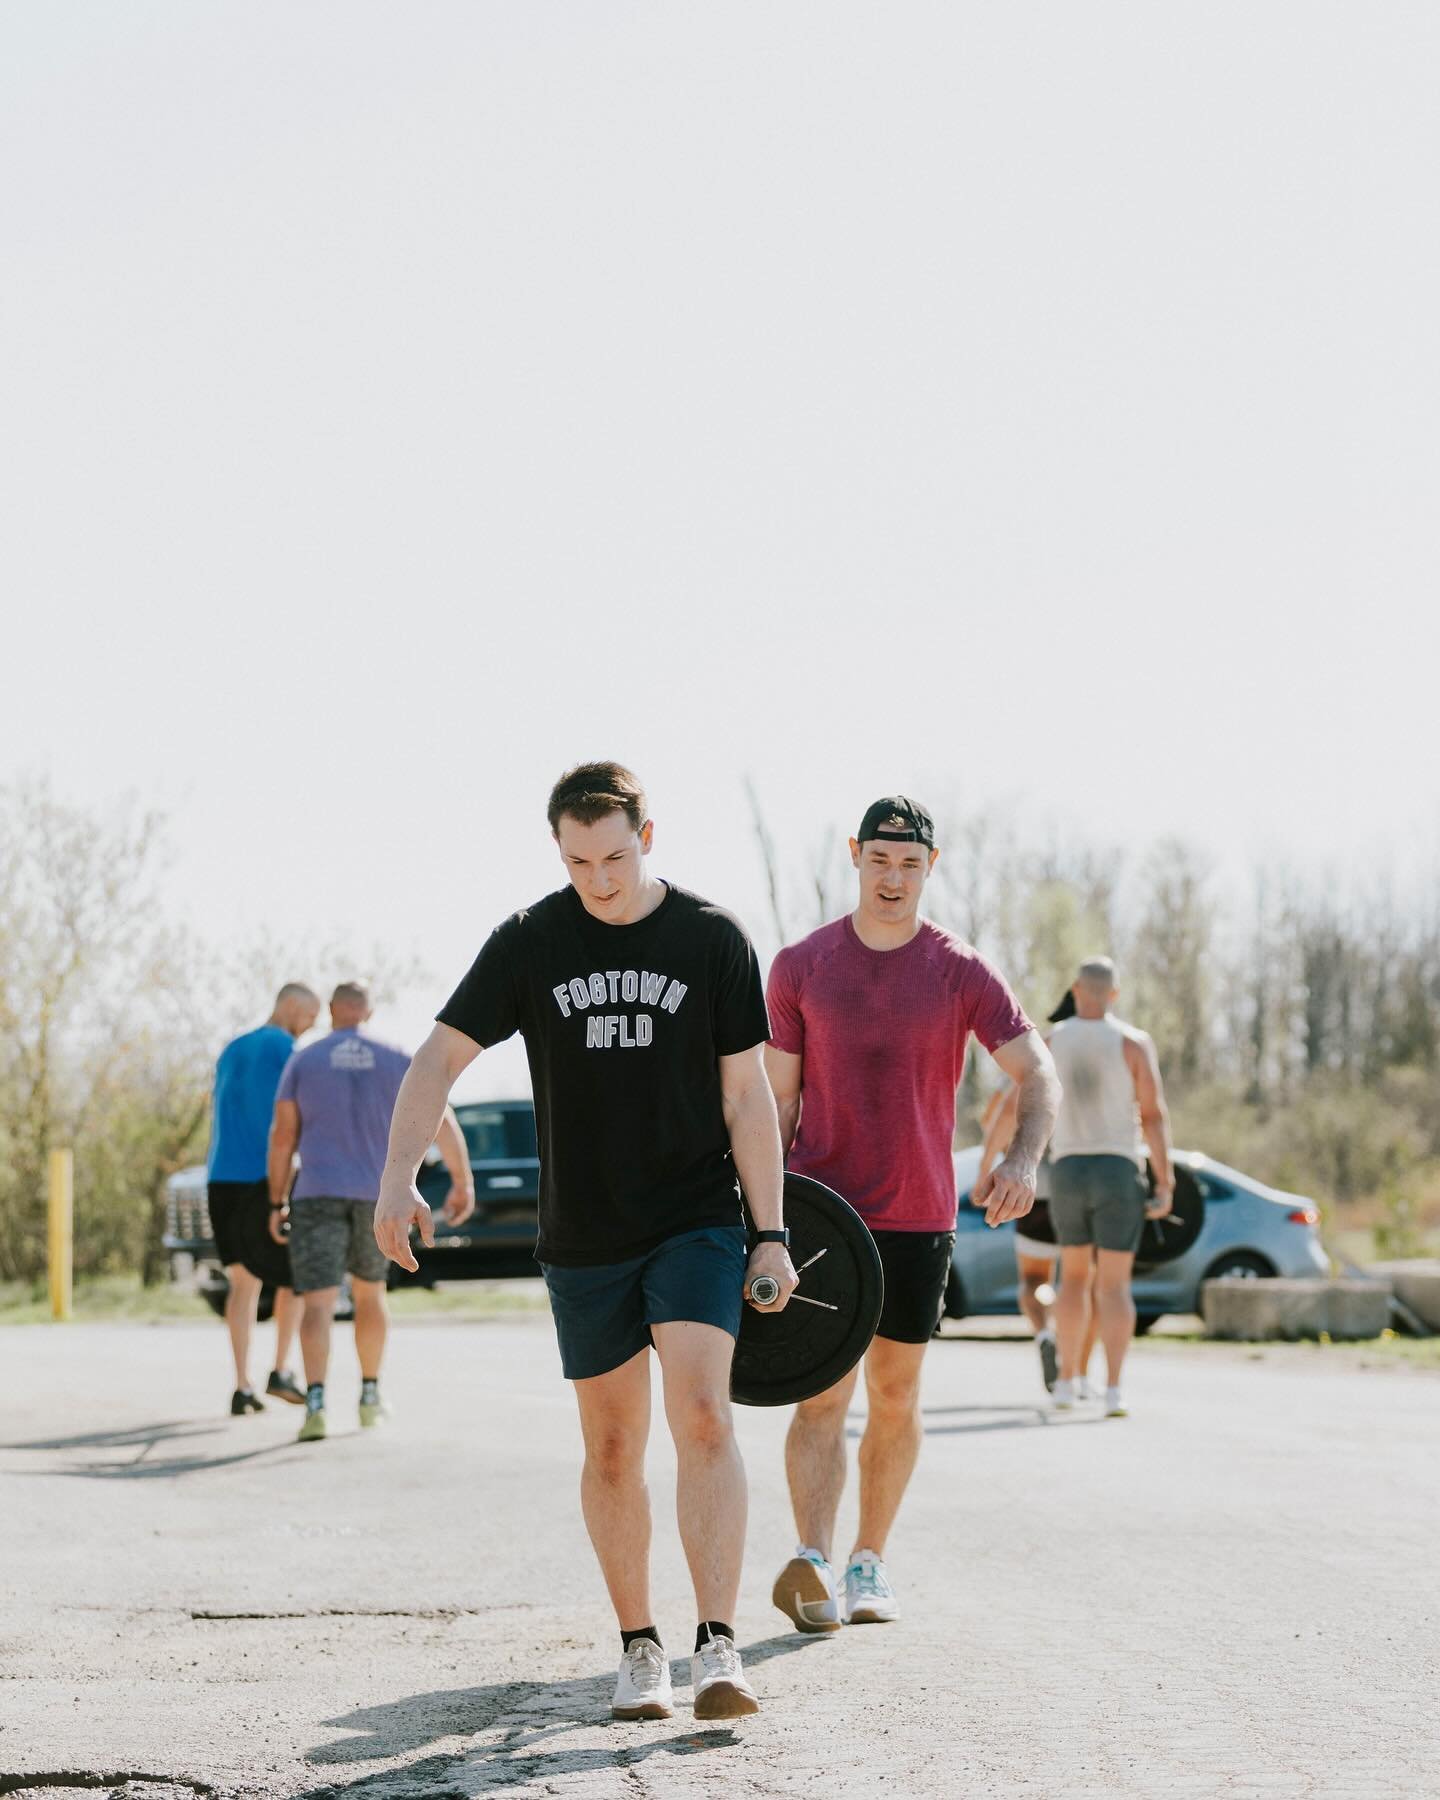 Constantly varied functional movement.

#CrossFitIndestri
#indestriSTRONG
#weINDESTRUCTIBLE
#CrossFit
#CrossFitCanada
#OURCommunity
#Collingwood
#ThisisYear14
#weCrossFit

Photo: @emmanicholphotography